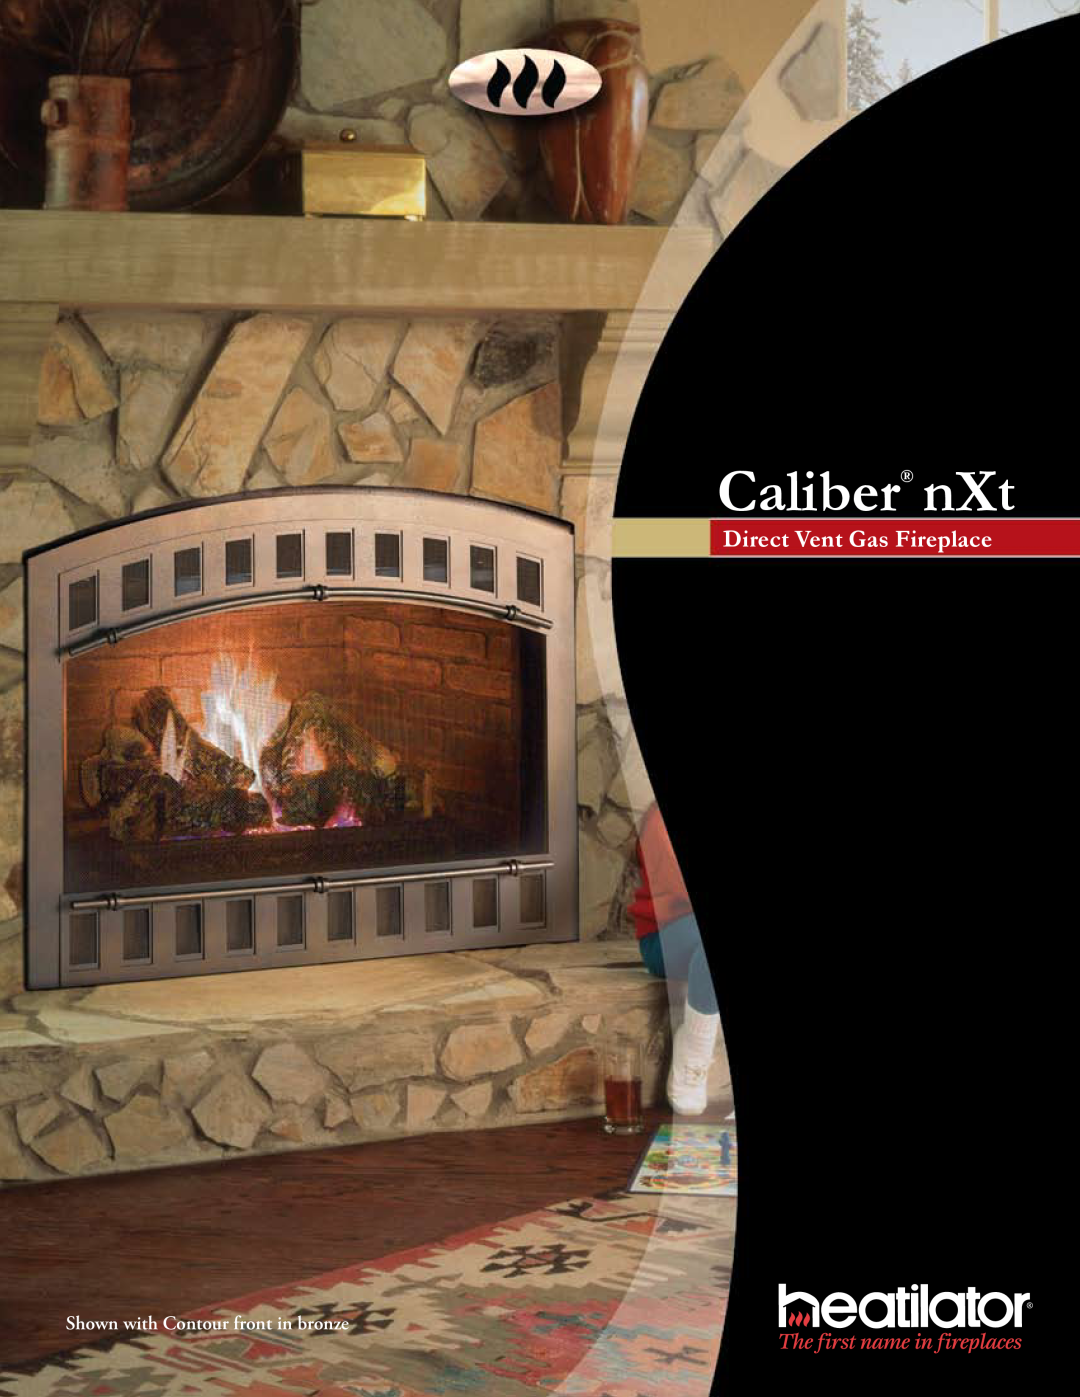 Hearth and Home Technologies CNXT4842 manual Direct Vent Gas Fireplace, Caliber nXt, Shown with Contour front in bronze 